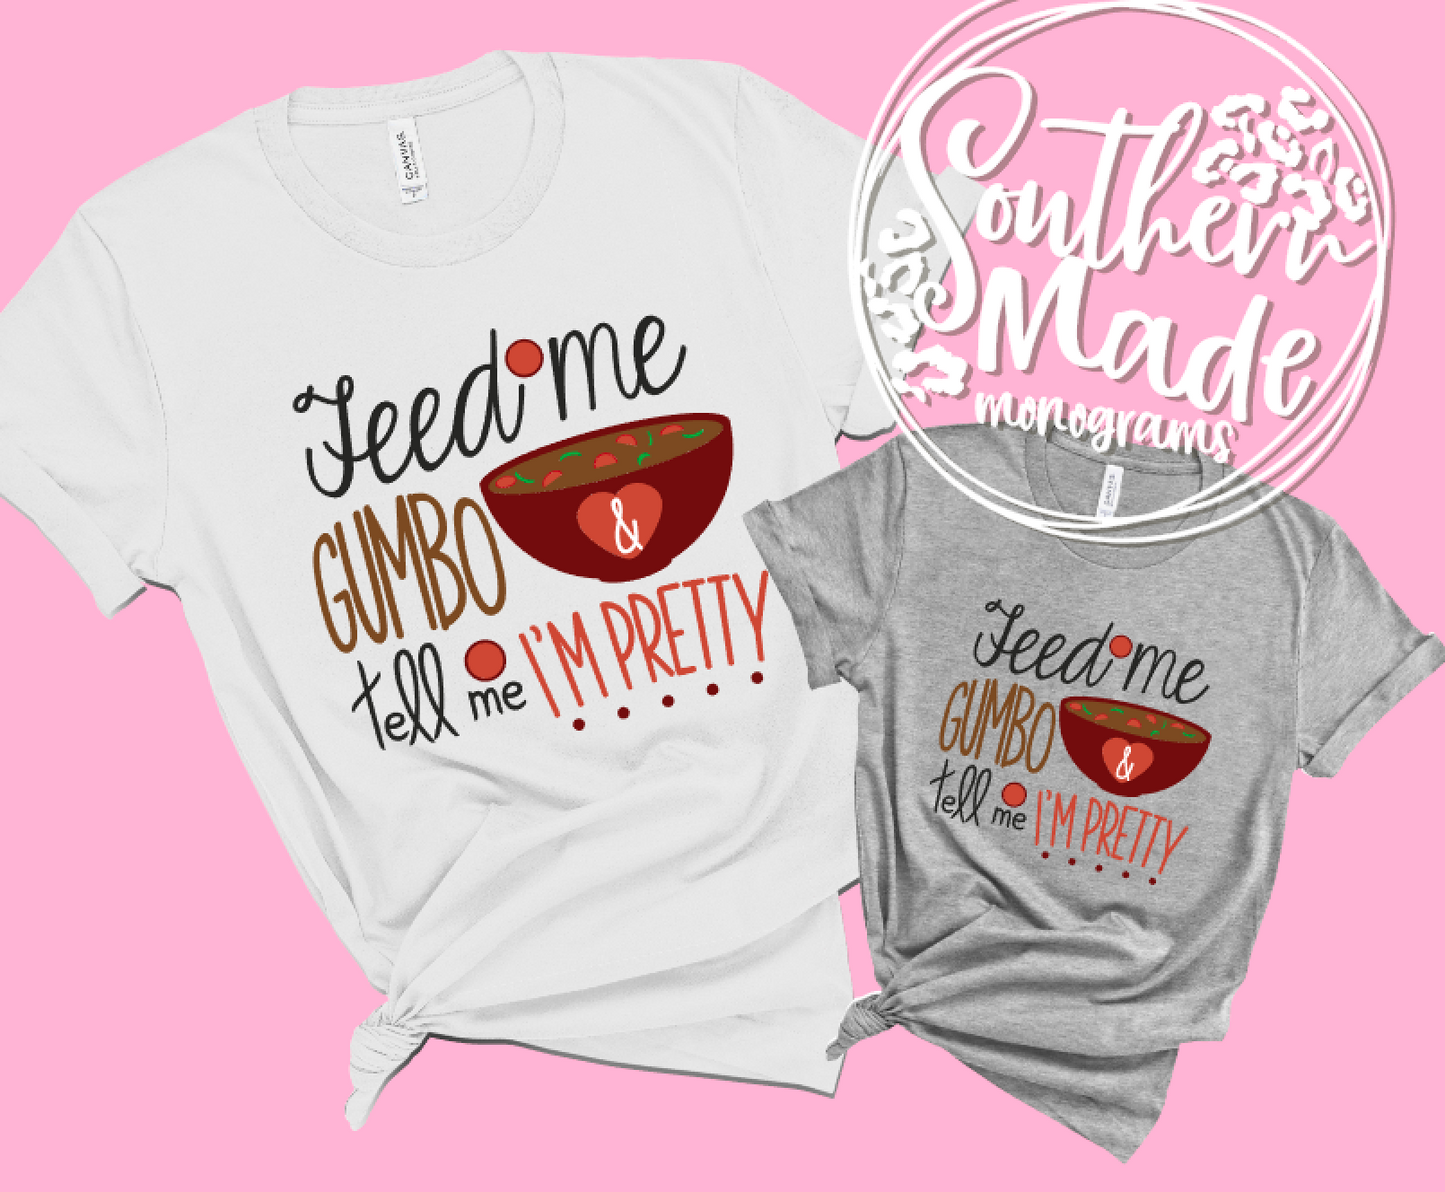 Feed Me Gumbo & Tell Me I'm Pretty - All Sizes & Styles